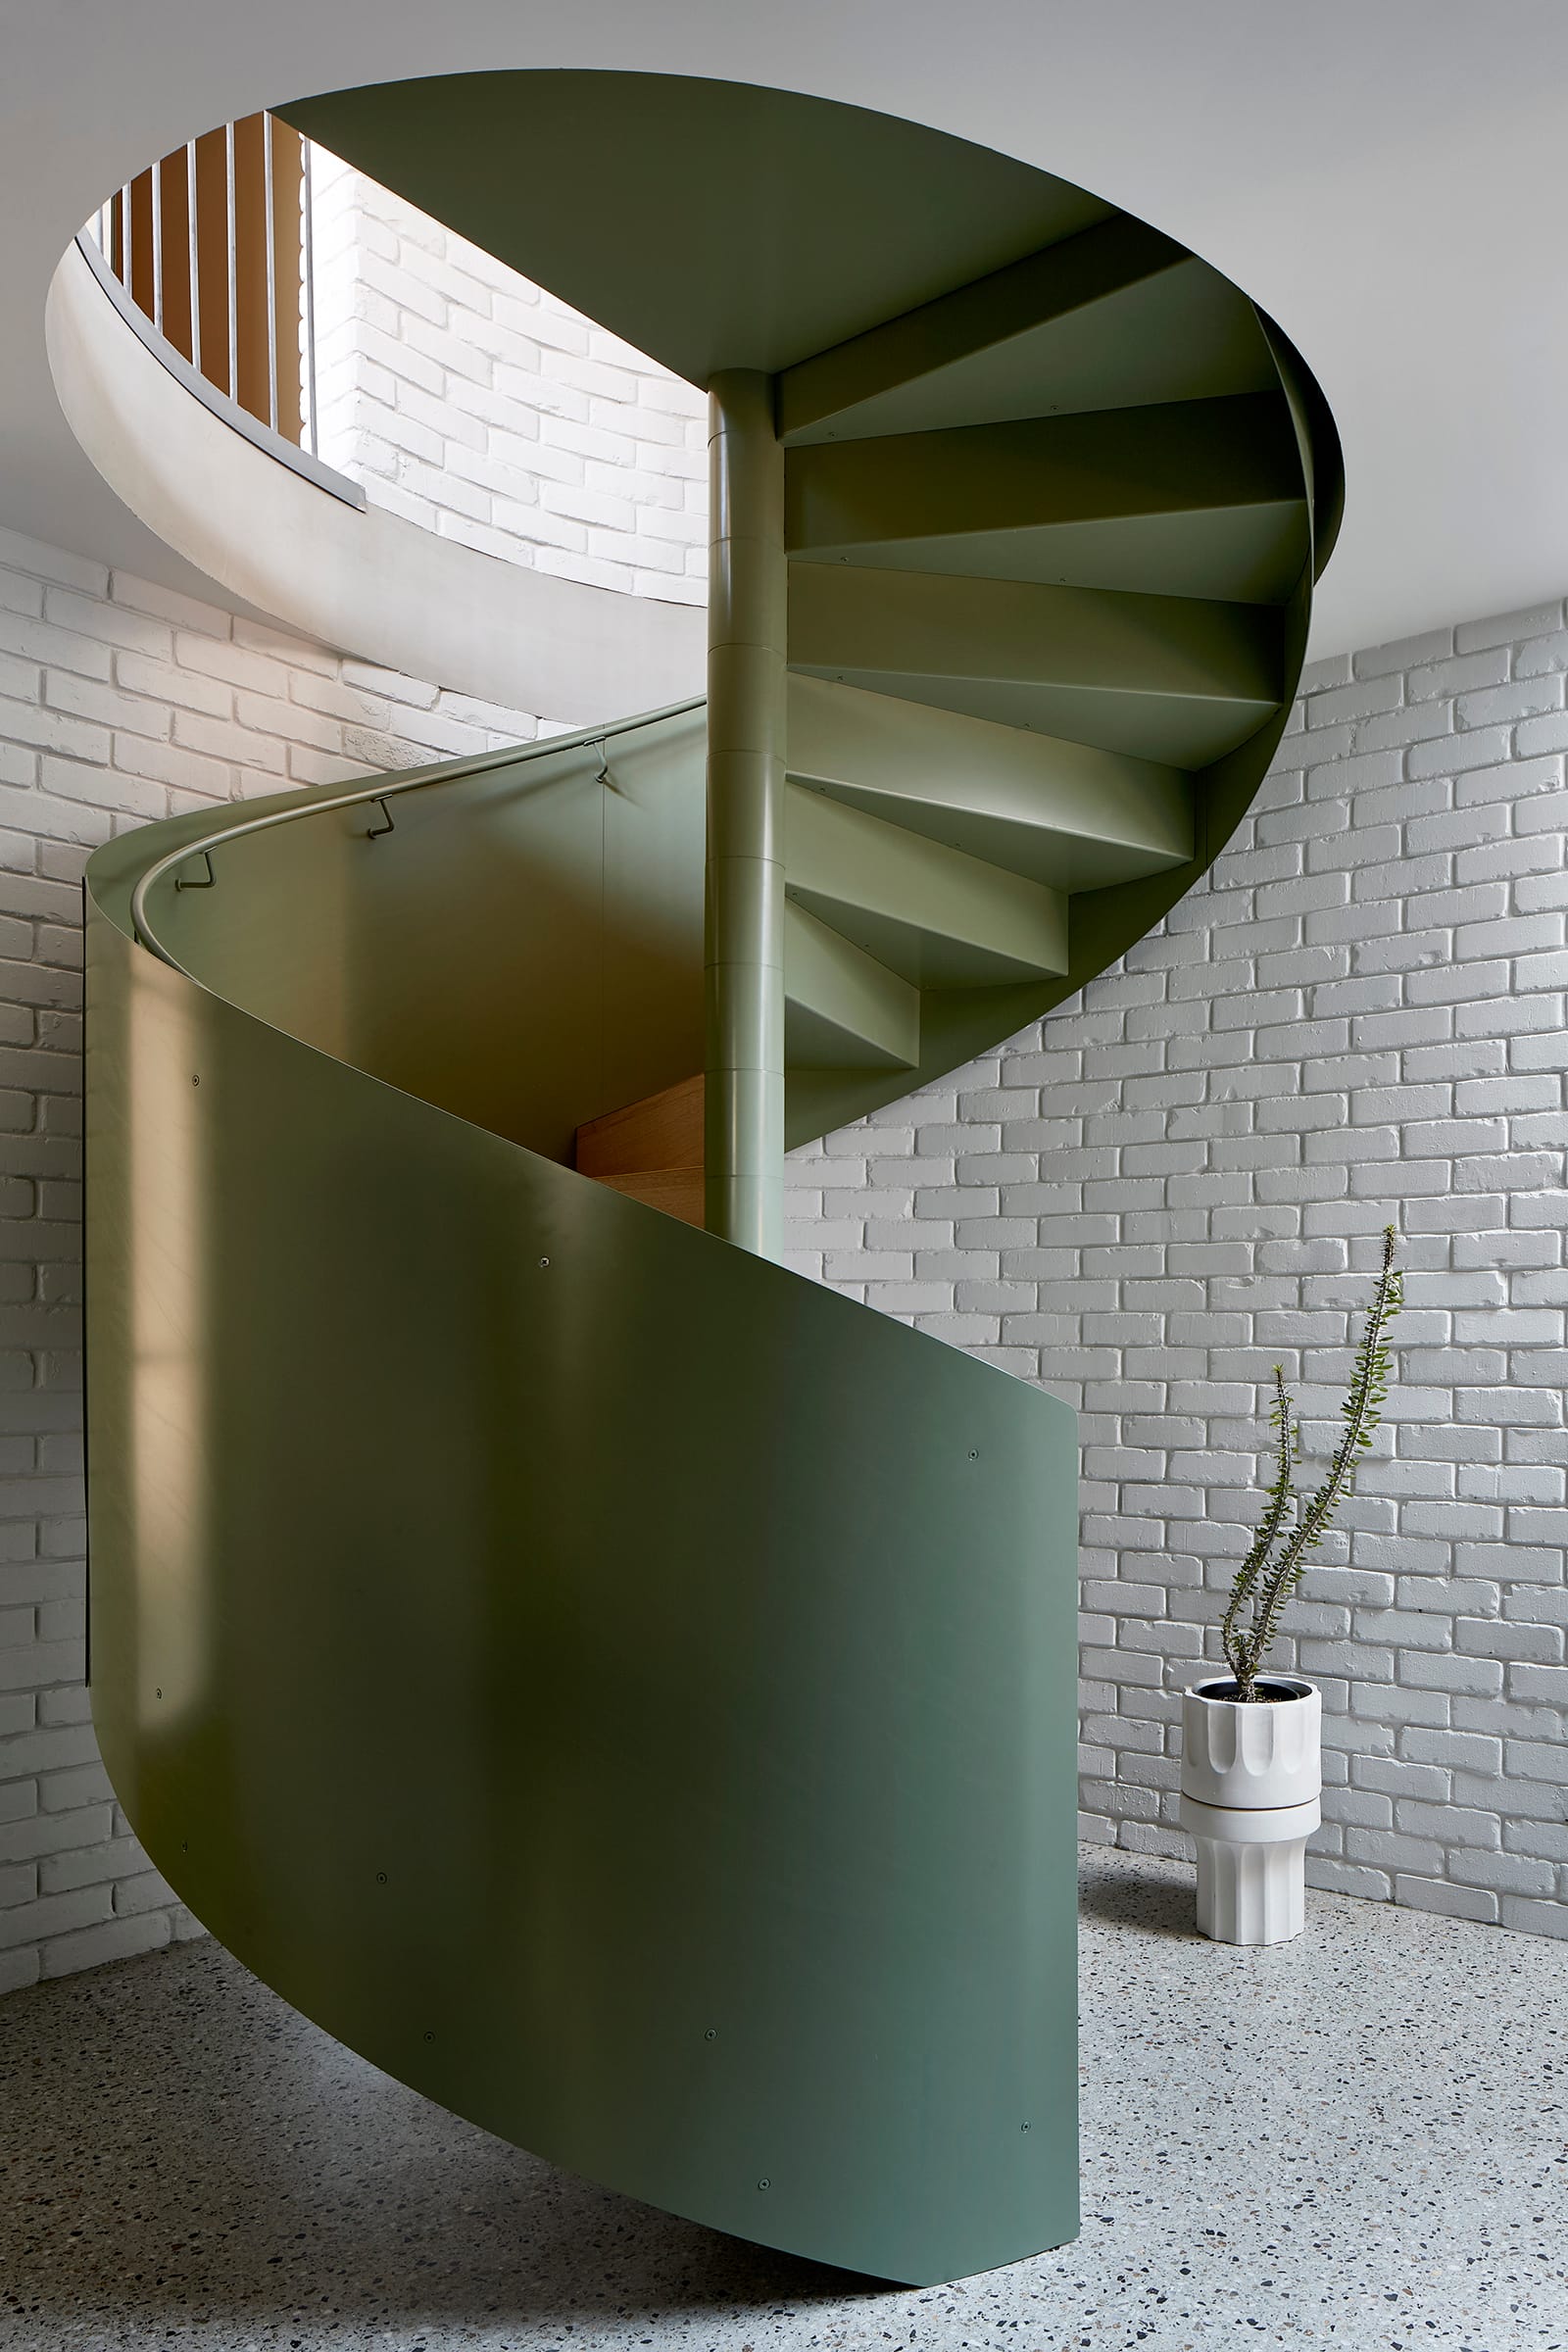 Fabrica by mcmahon and nerlich. Photography by Shannon McGrath. Green metal spiral staircase with green railing. Terrazzo floor and white brick walls. 